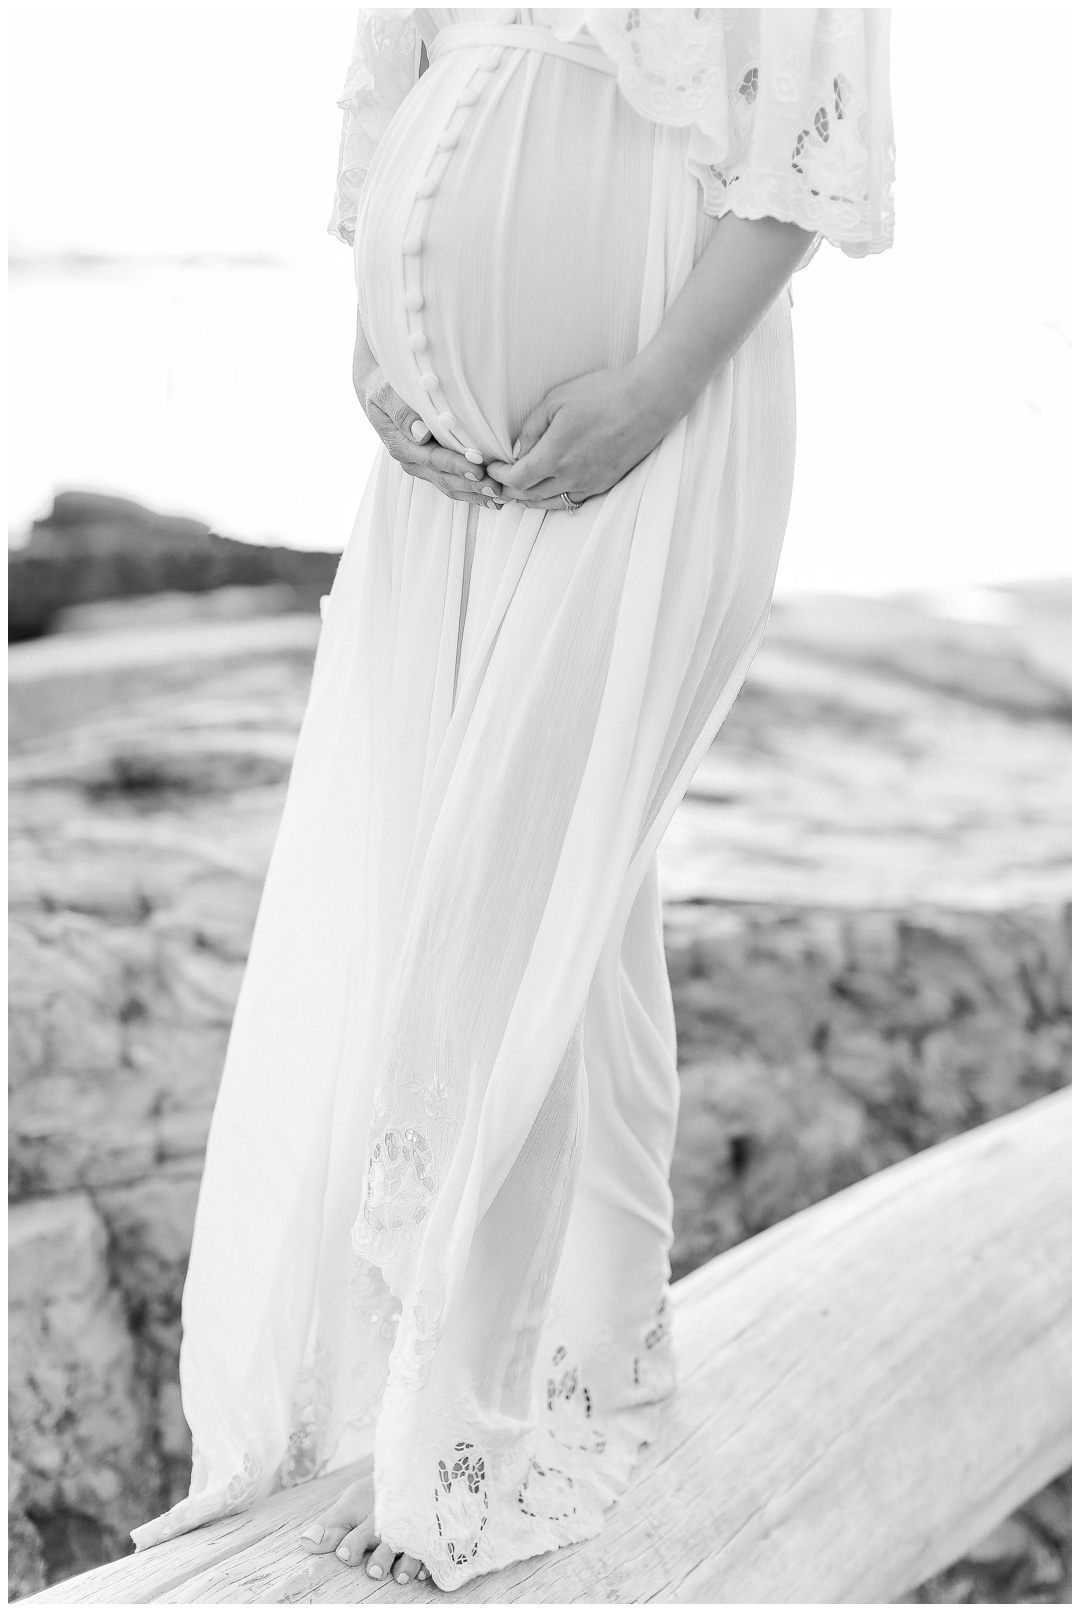 Crystal-Cove-State-Beach-Maternity-Session-Crystal-Cove-Newport-Beach-Maternity-Photographer-Crystal-Cove-Session-Cori-Kleckner-Photography-Orange-County-Maternity-Family-Photos-Session-_0900.jpg